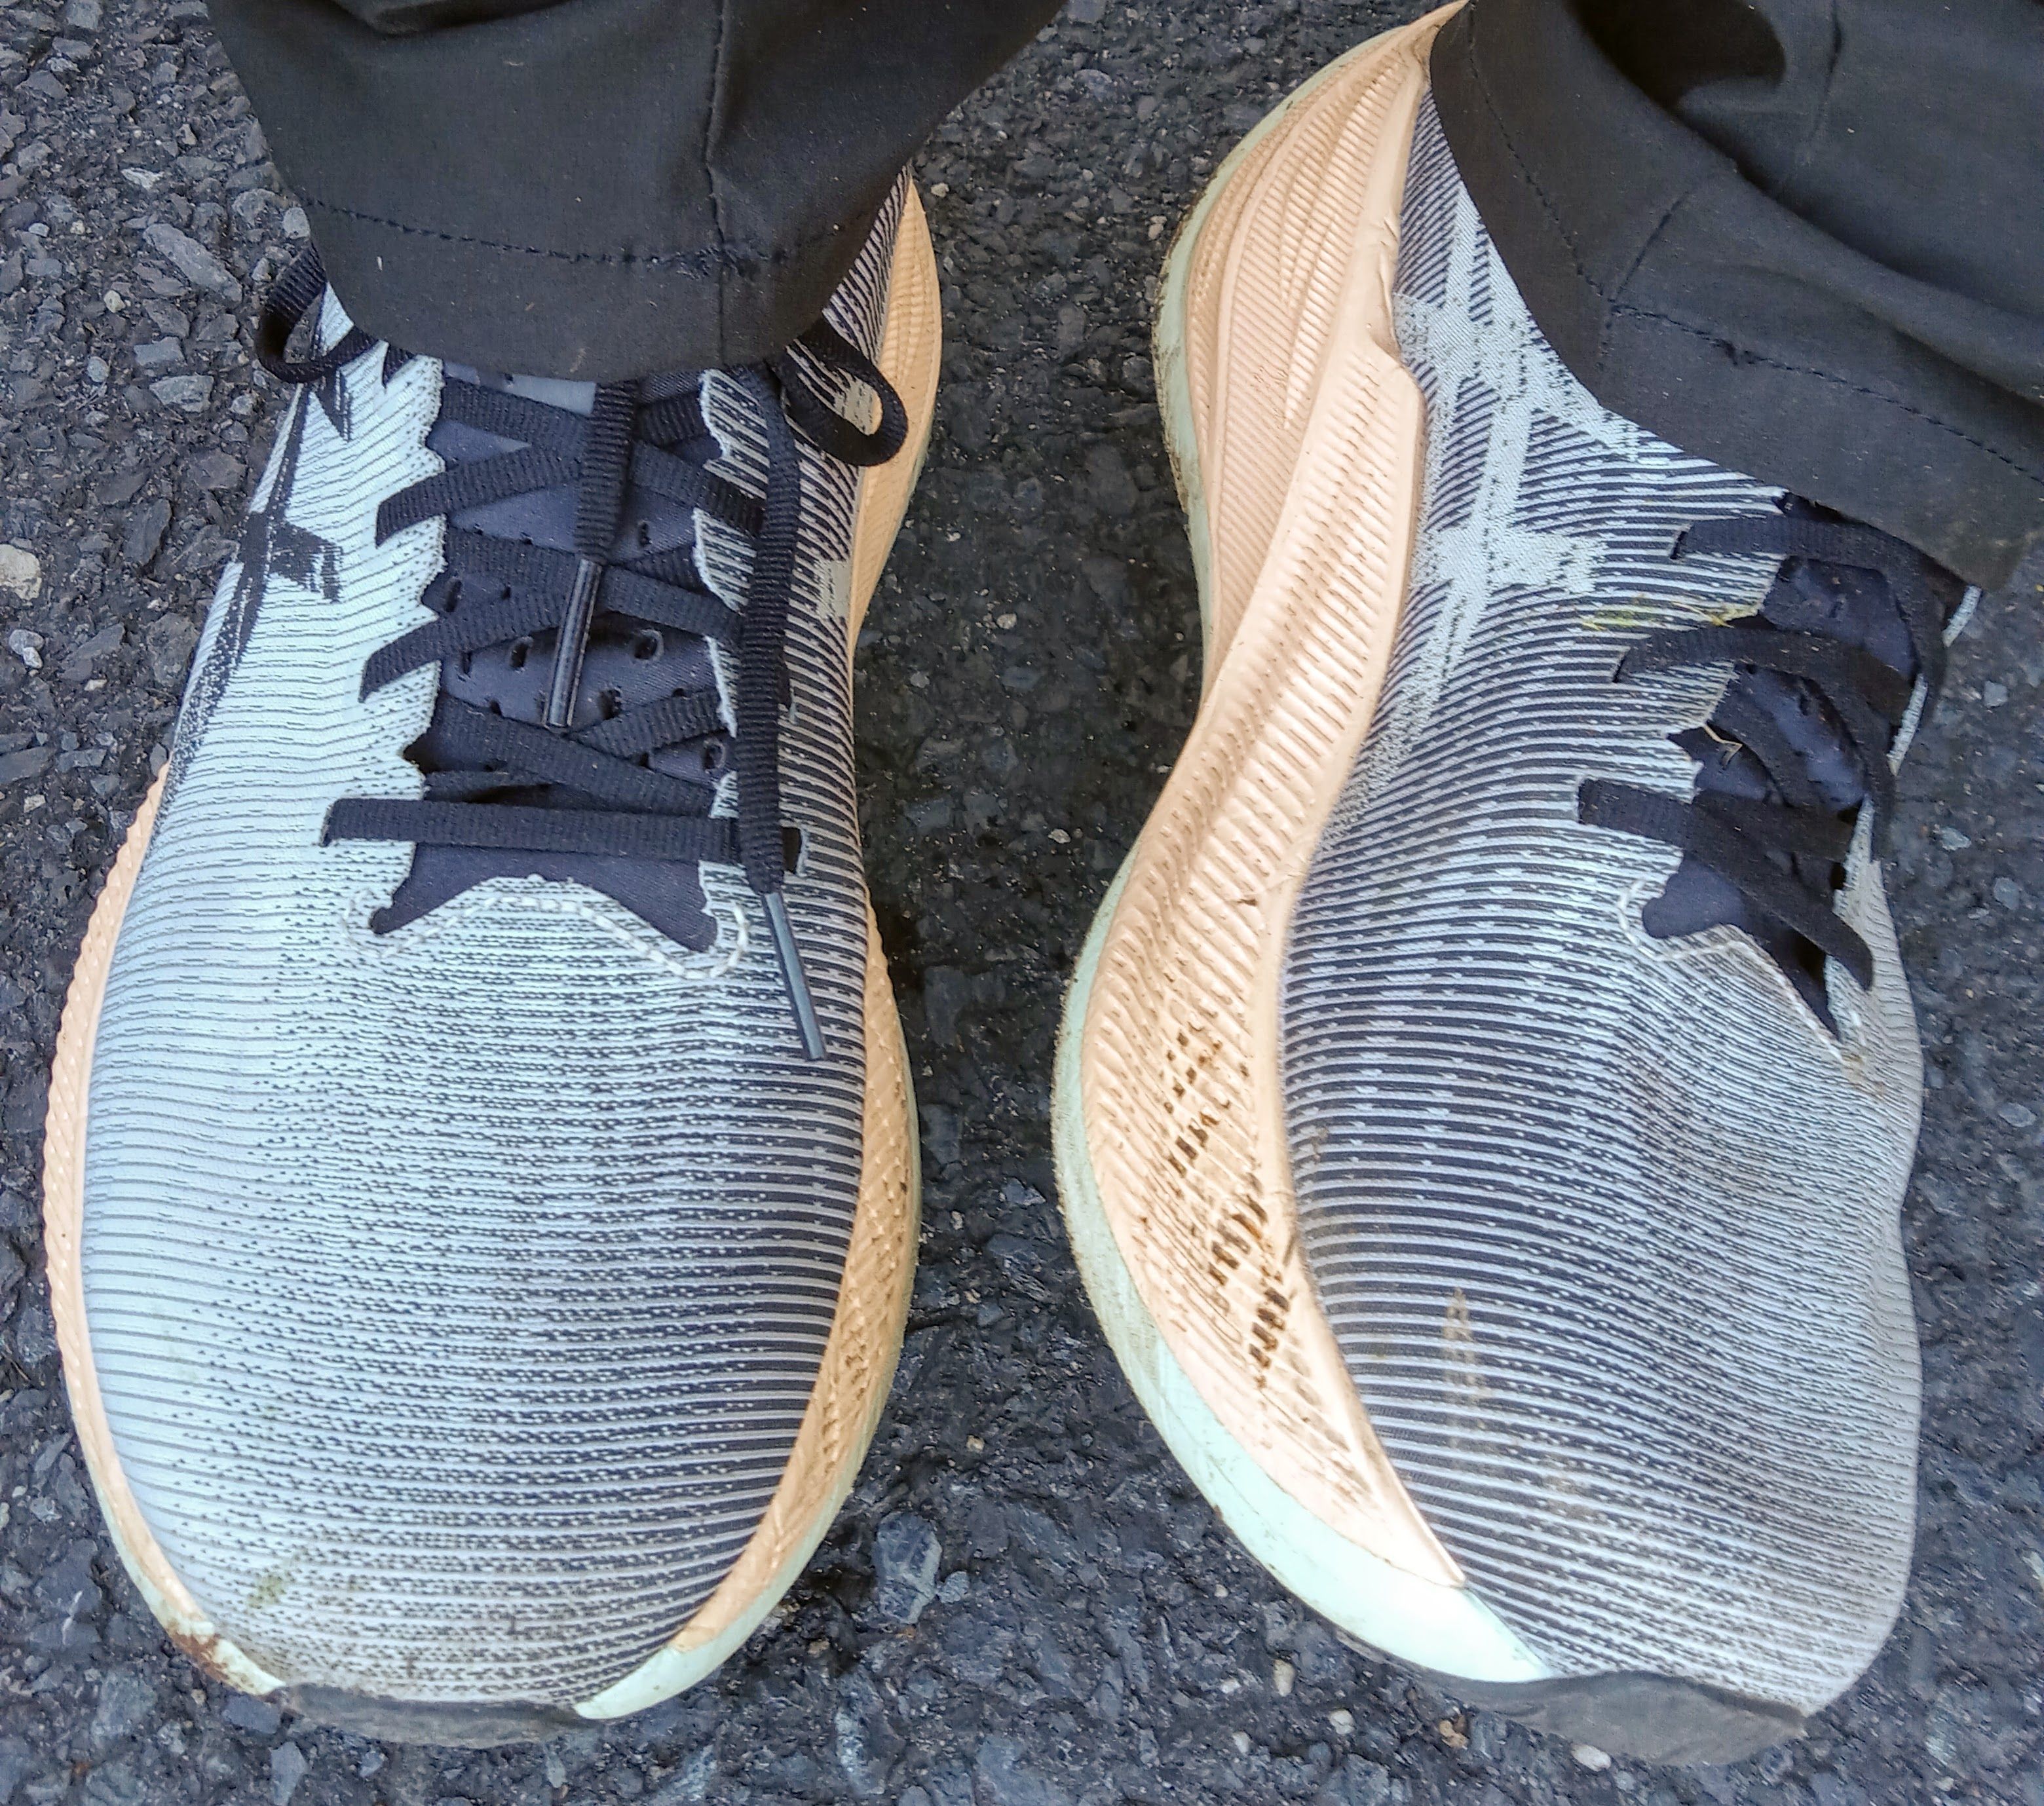 Asics Superblast Review: Cushioned, It's Not